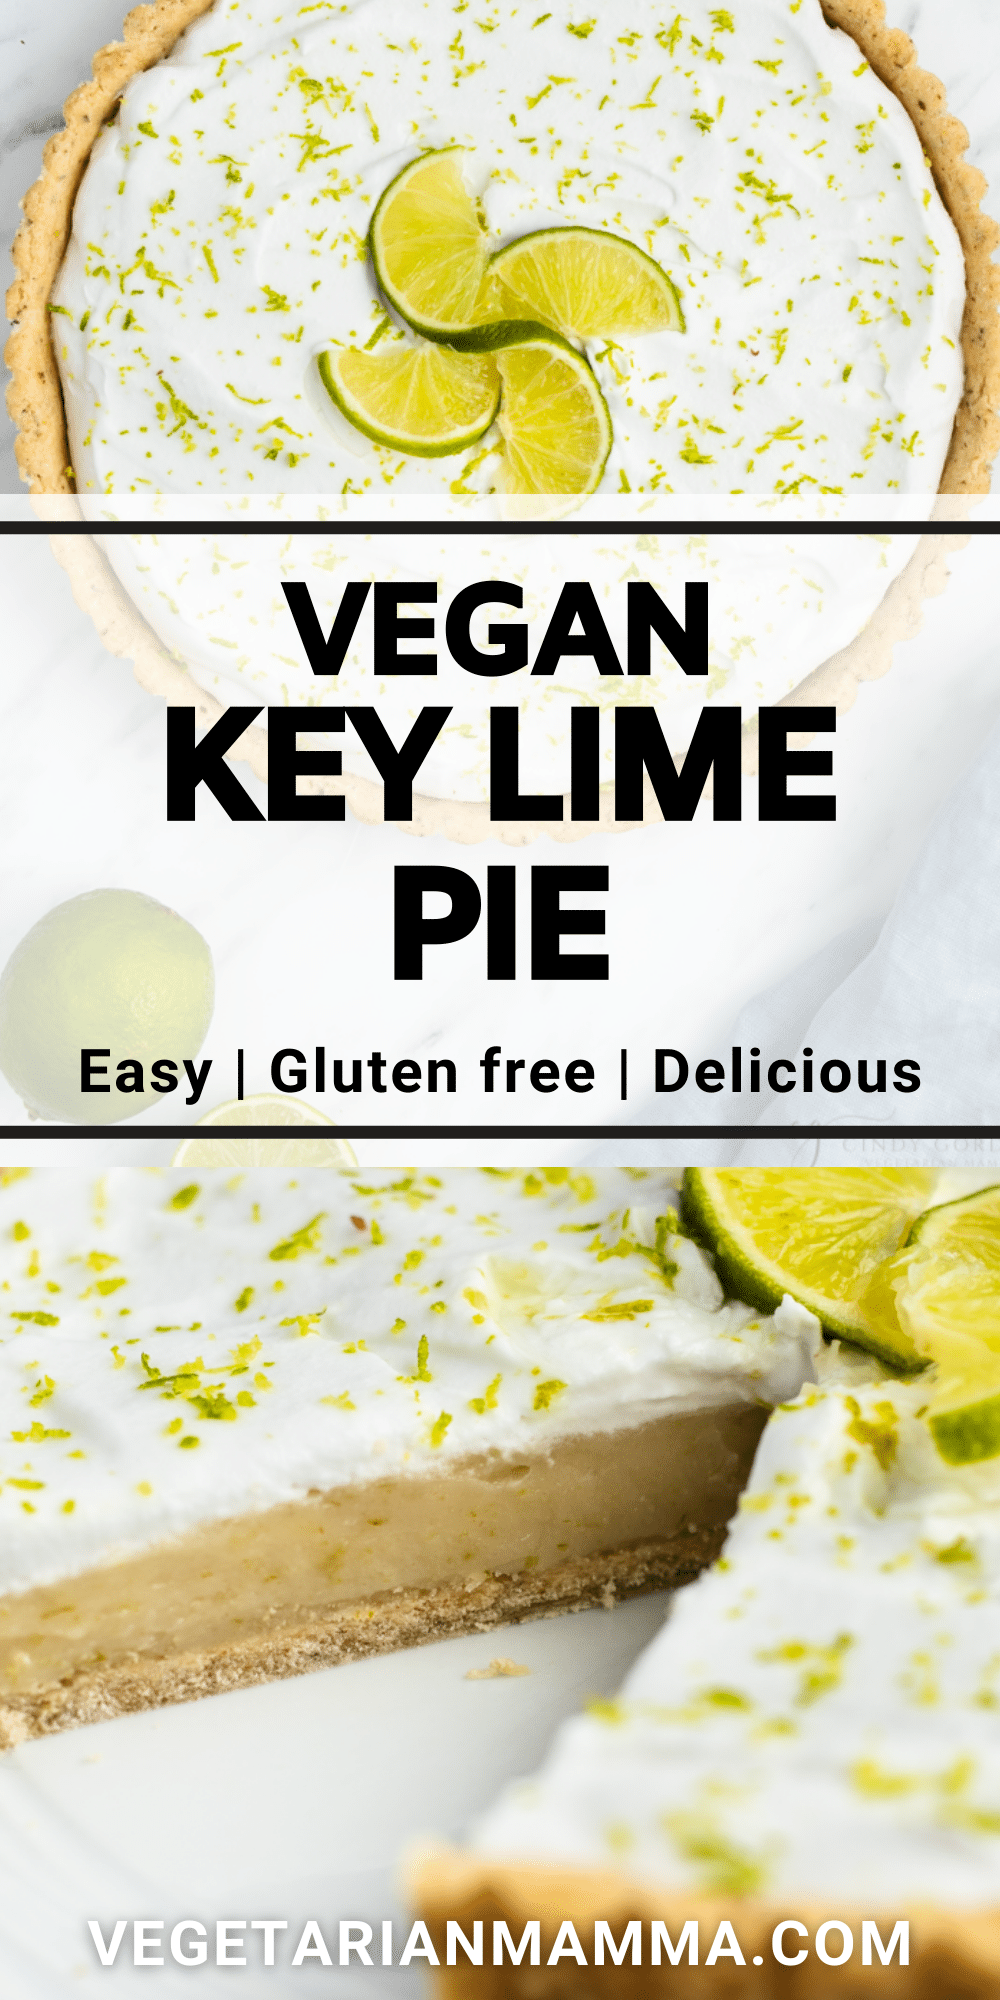 Learn to make a Vegan Key Lime pie! This delicious dessert is creamy, luscious, tart, and sweet, made with a vegan pie crust, a coconut cream lime filling, and topped with even more whipped coconut cream.